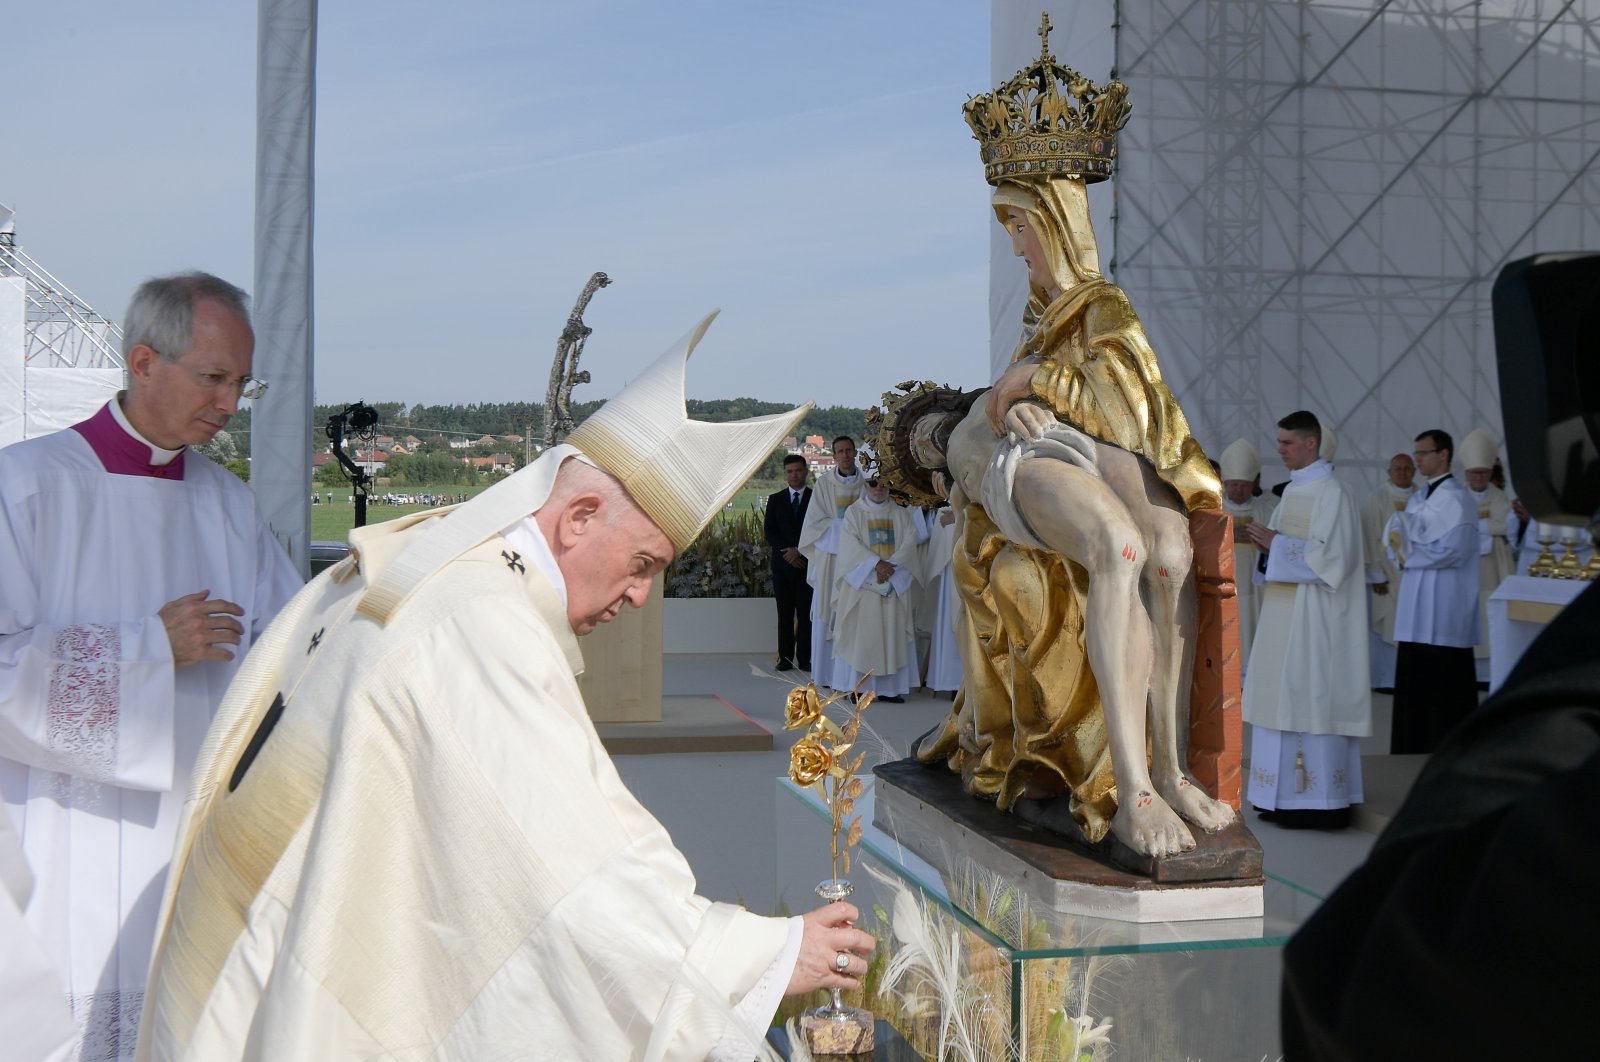 Pope Francis celebrates Holy Mass at the Basilica of Our Lady of Sorrows in Sastin, Slovakia, Sept. 15, 2021. (Vatican Media/Handout via Reuters)